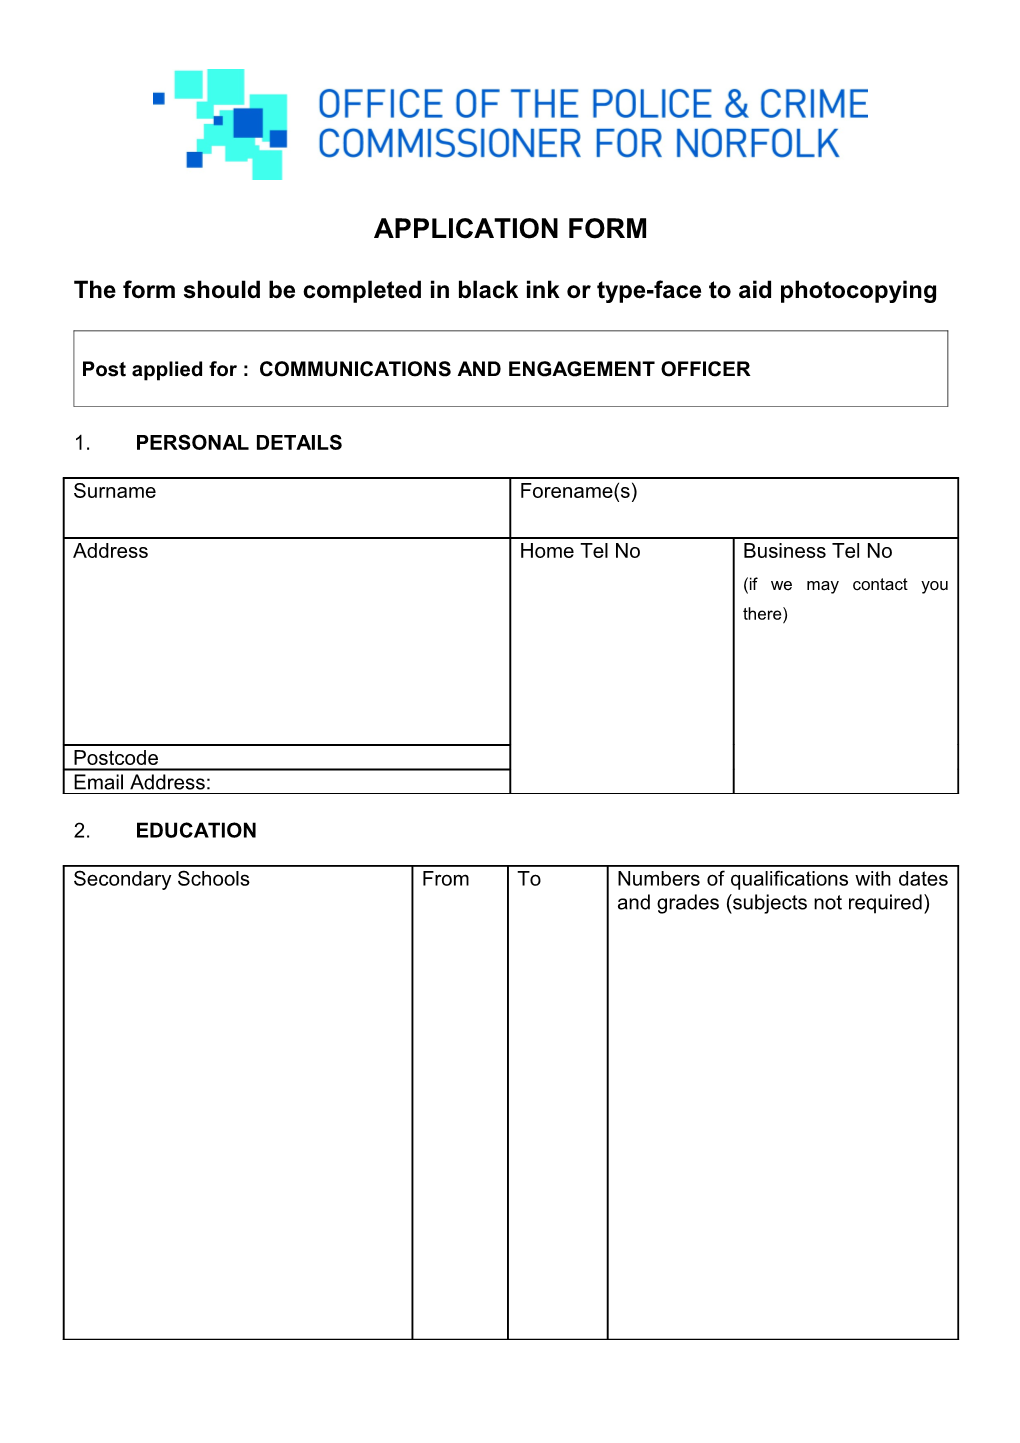 The Form Should Be Completed in Black Ink Or Type-Face to Aid Photocopying